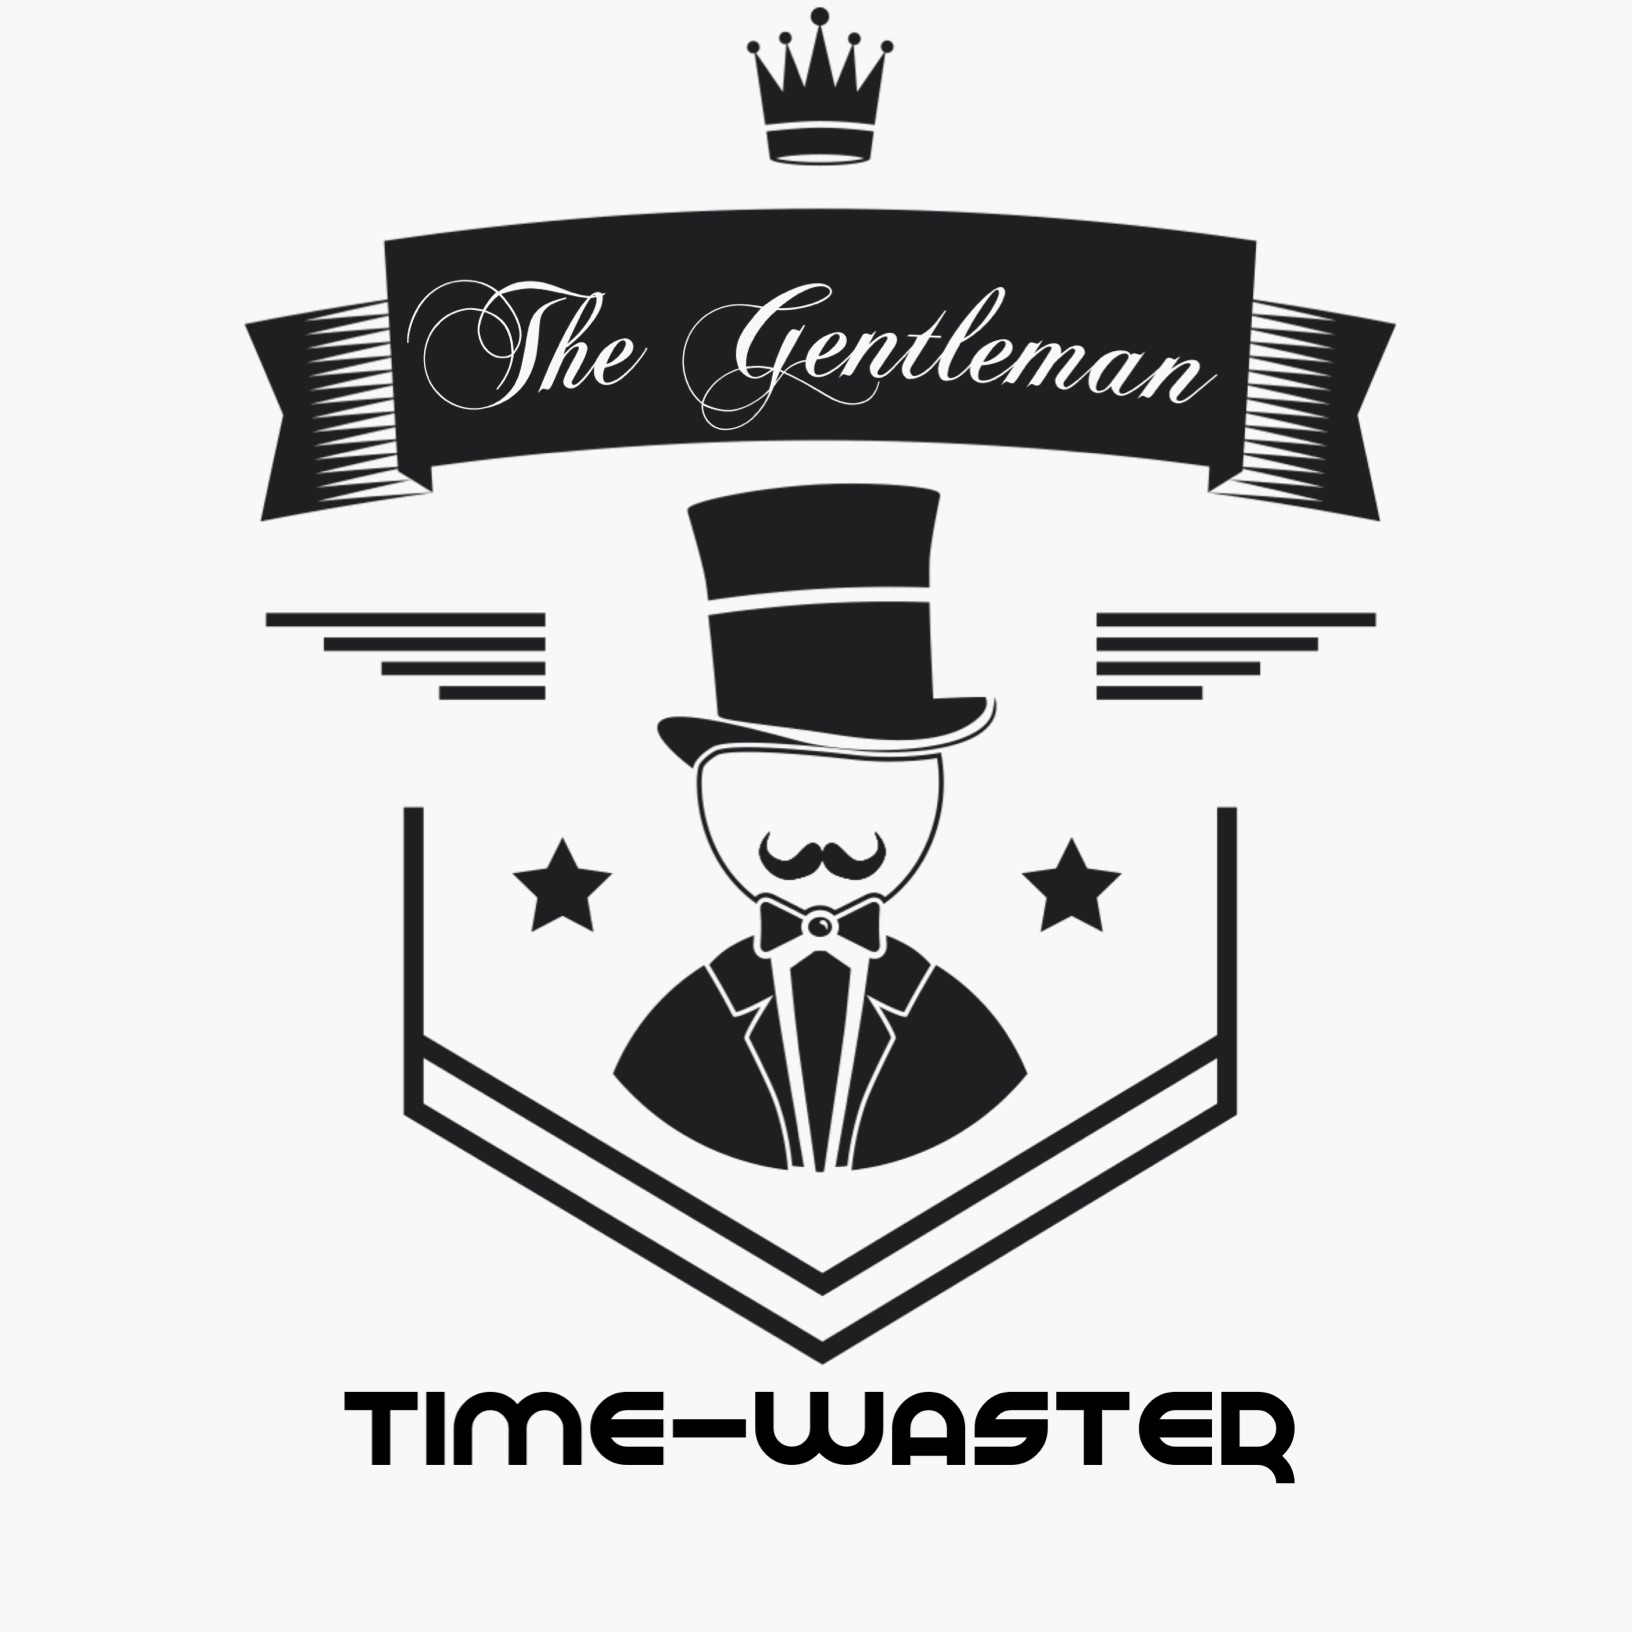 The Gentleman Time-waster: 3 apps for the week